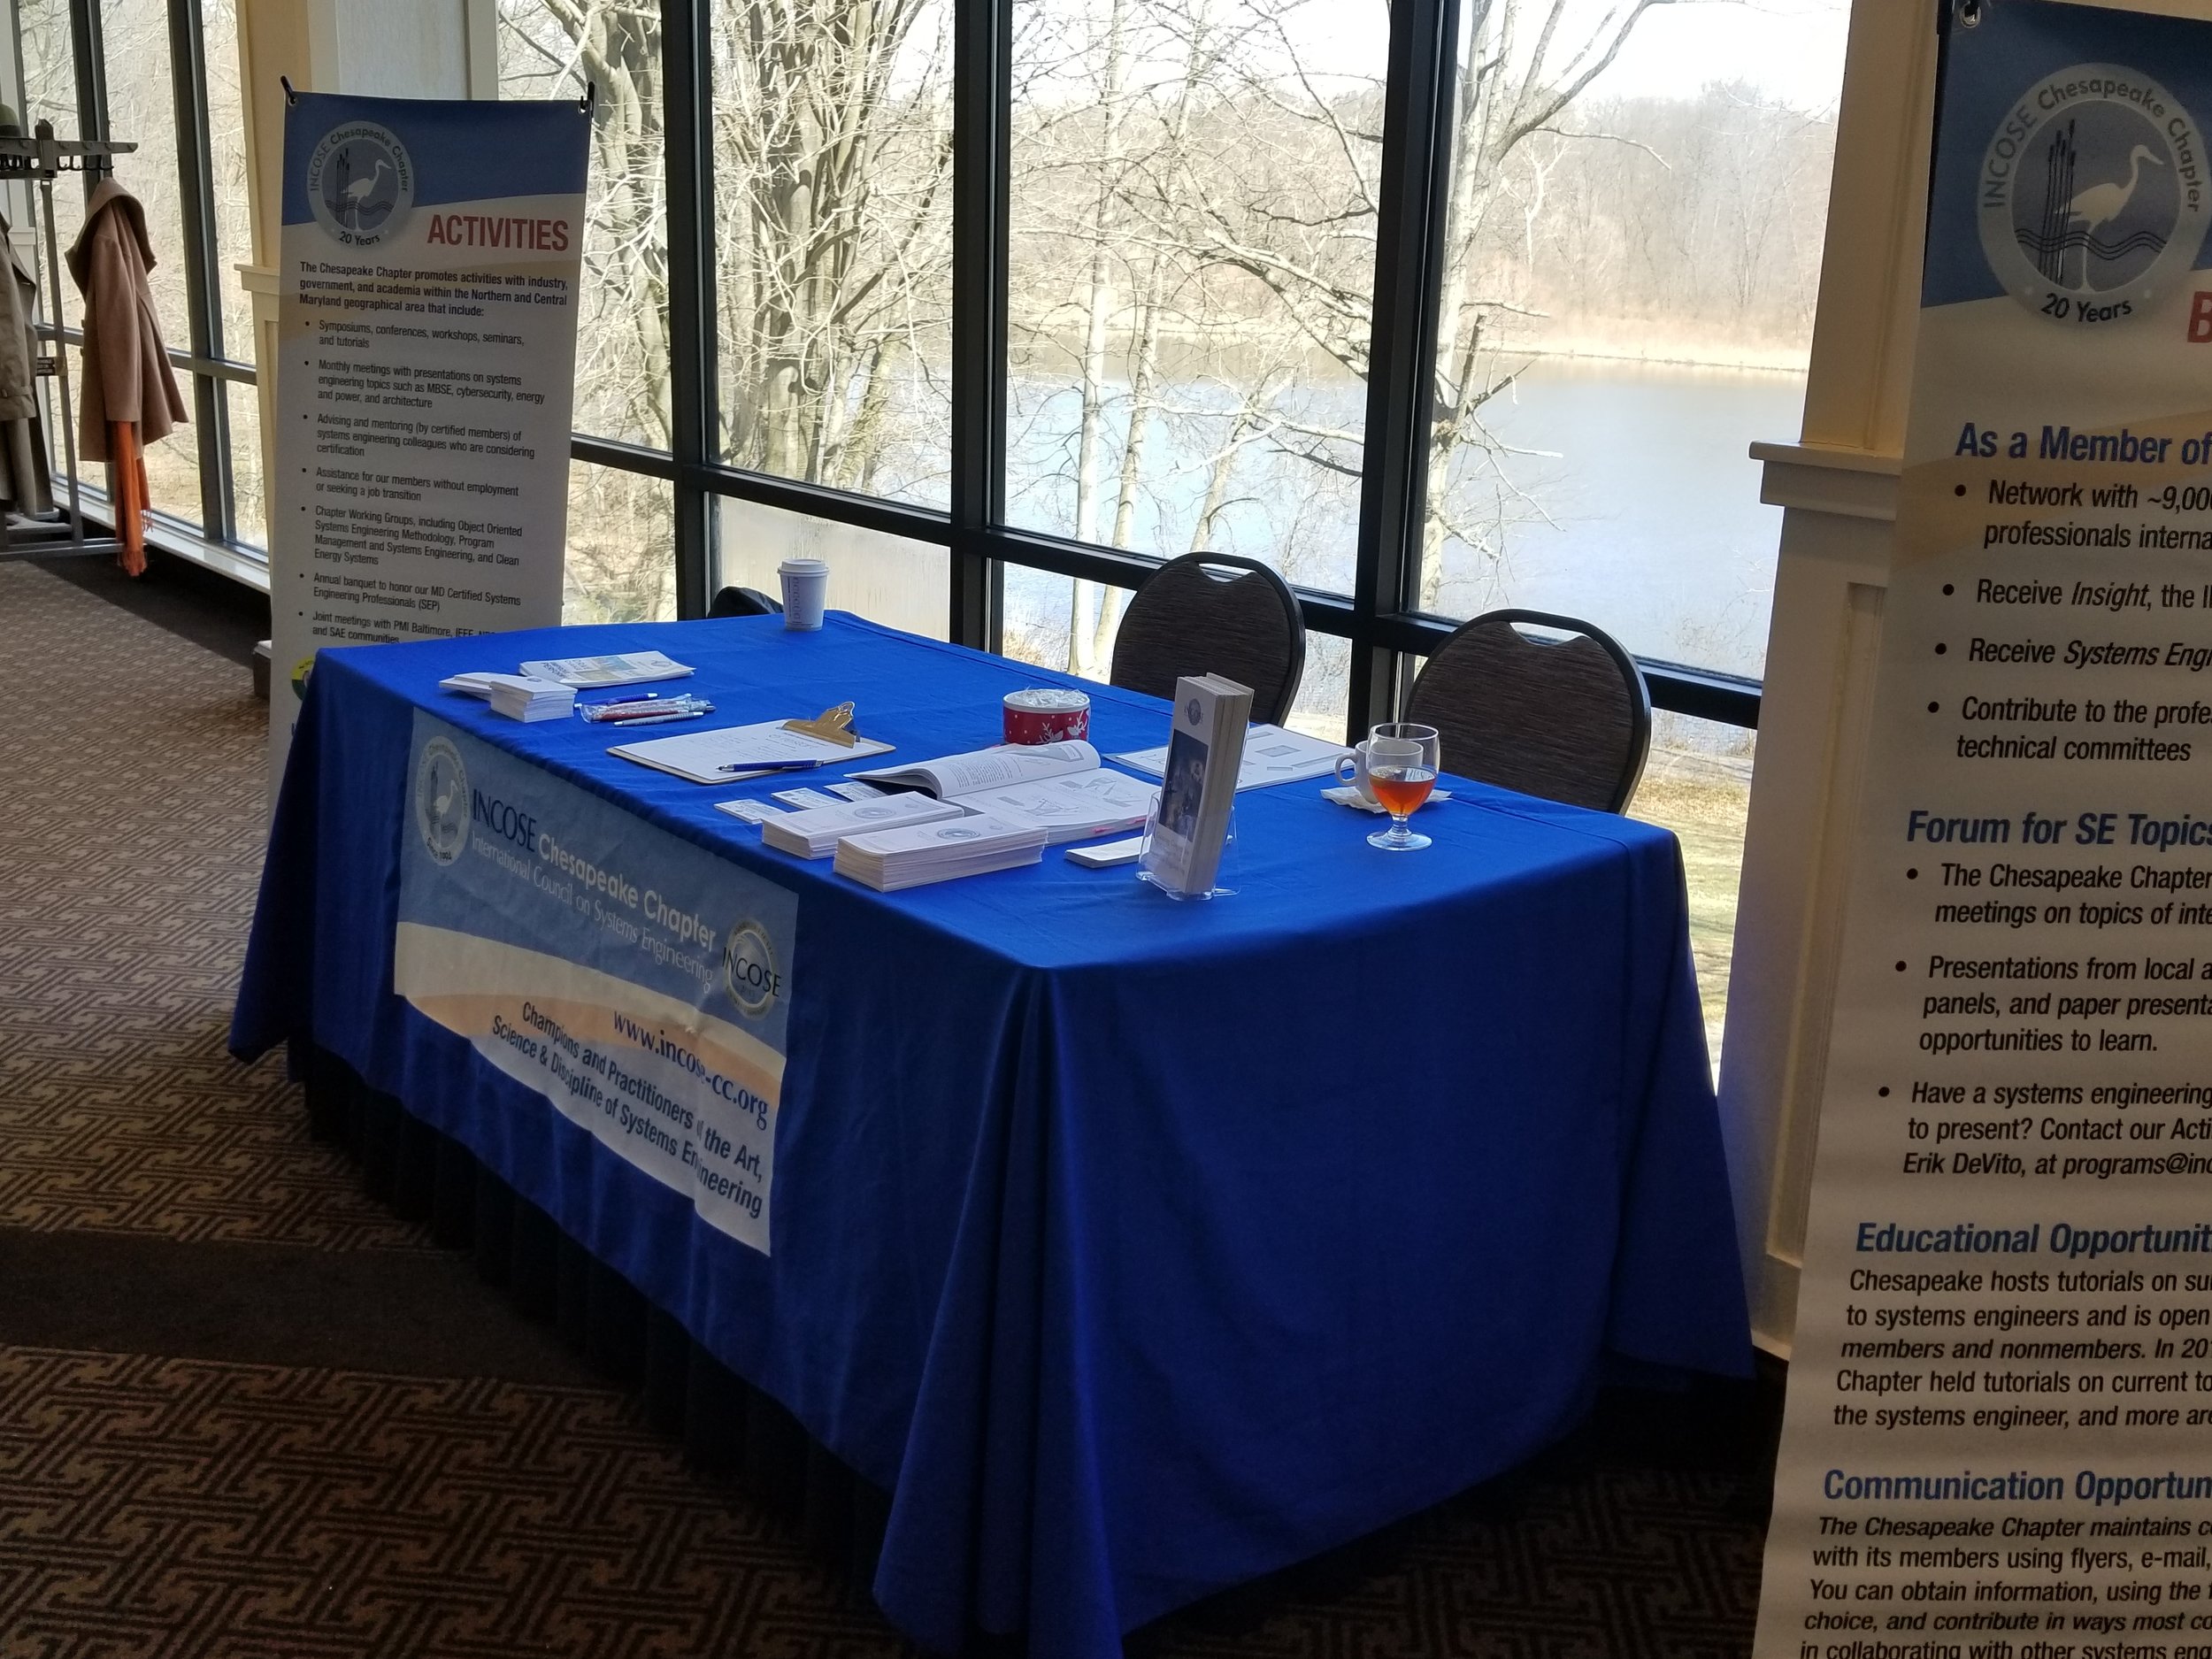  The INCOSE Chesapeake Chapter booth at the March 26, 2018 reStart job fair 